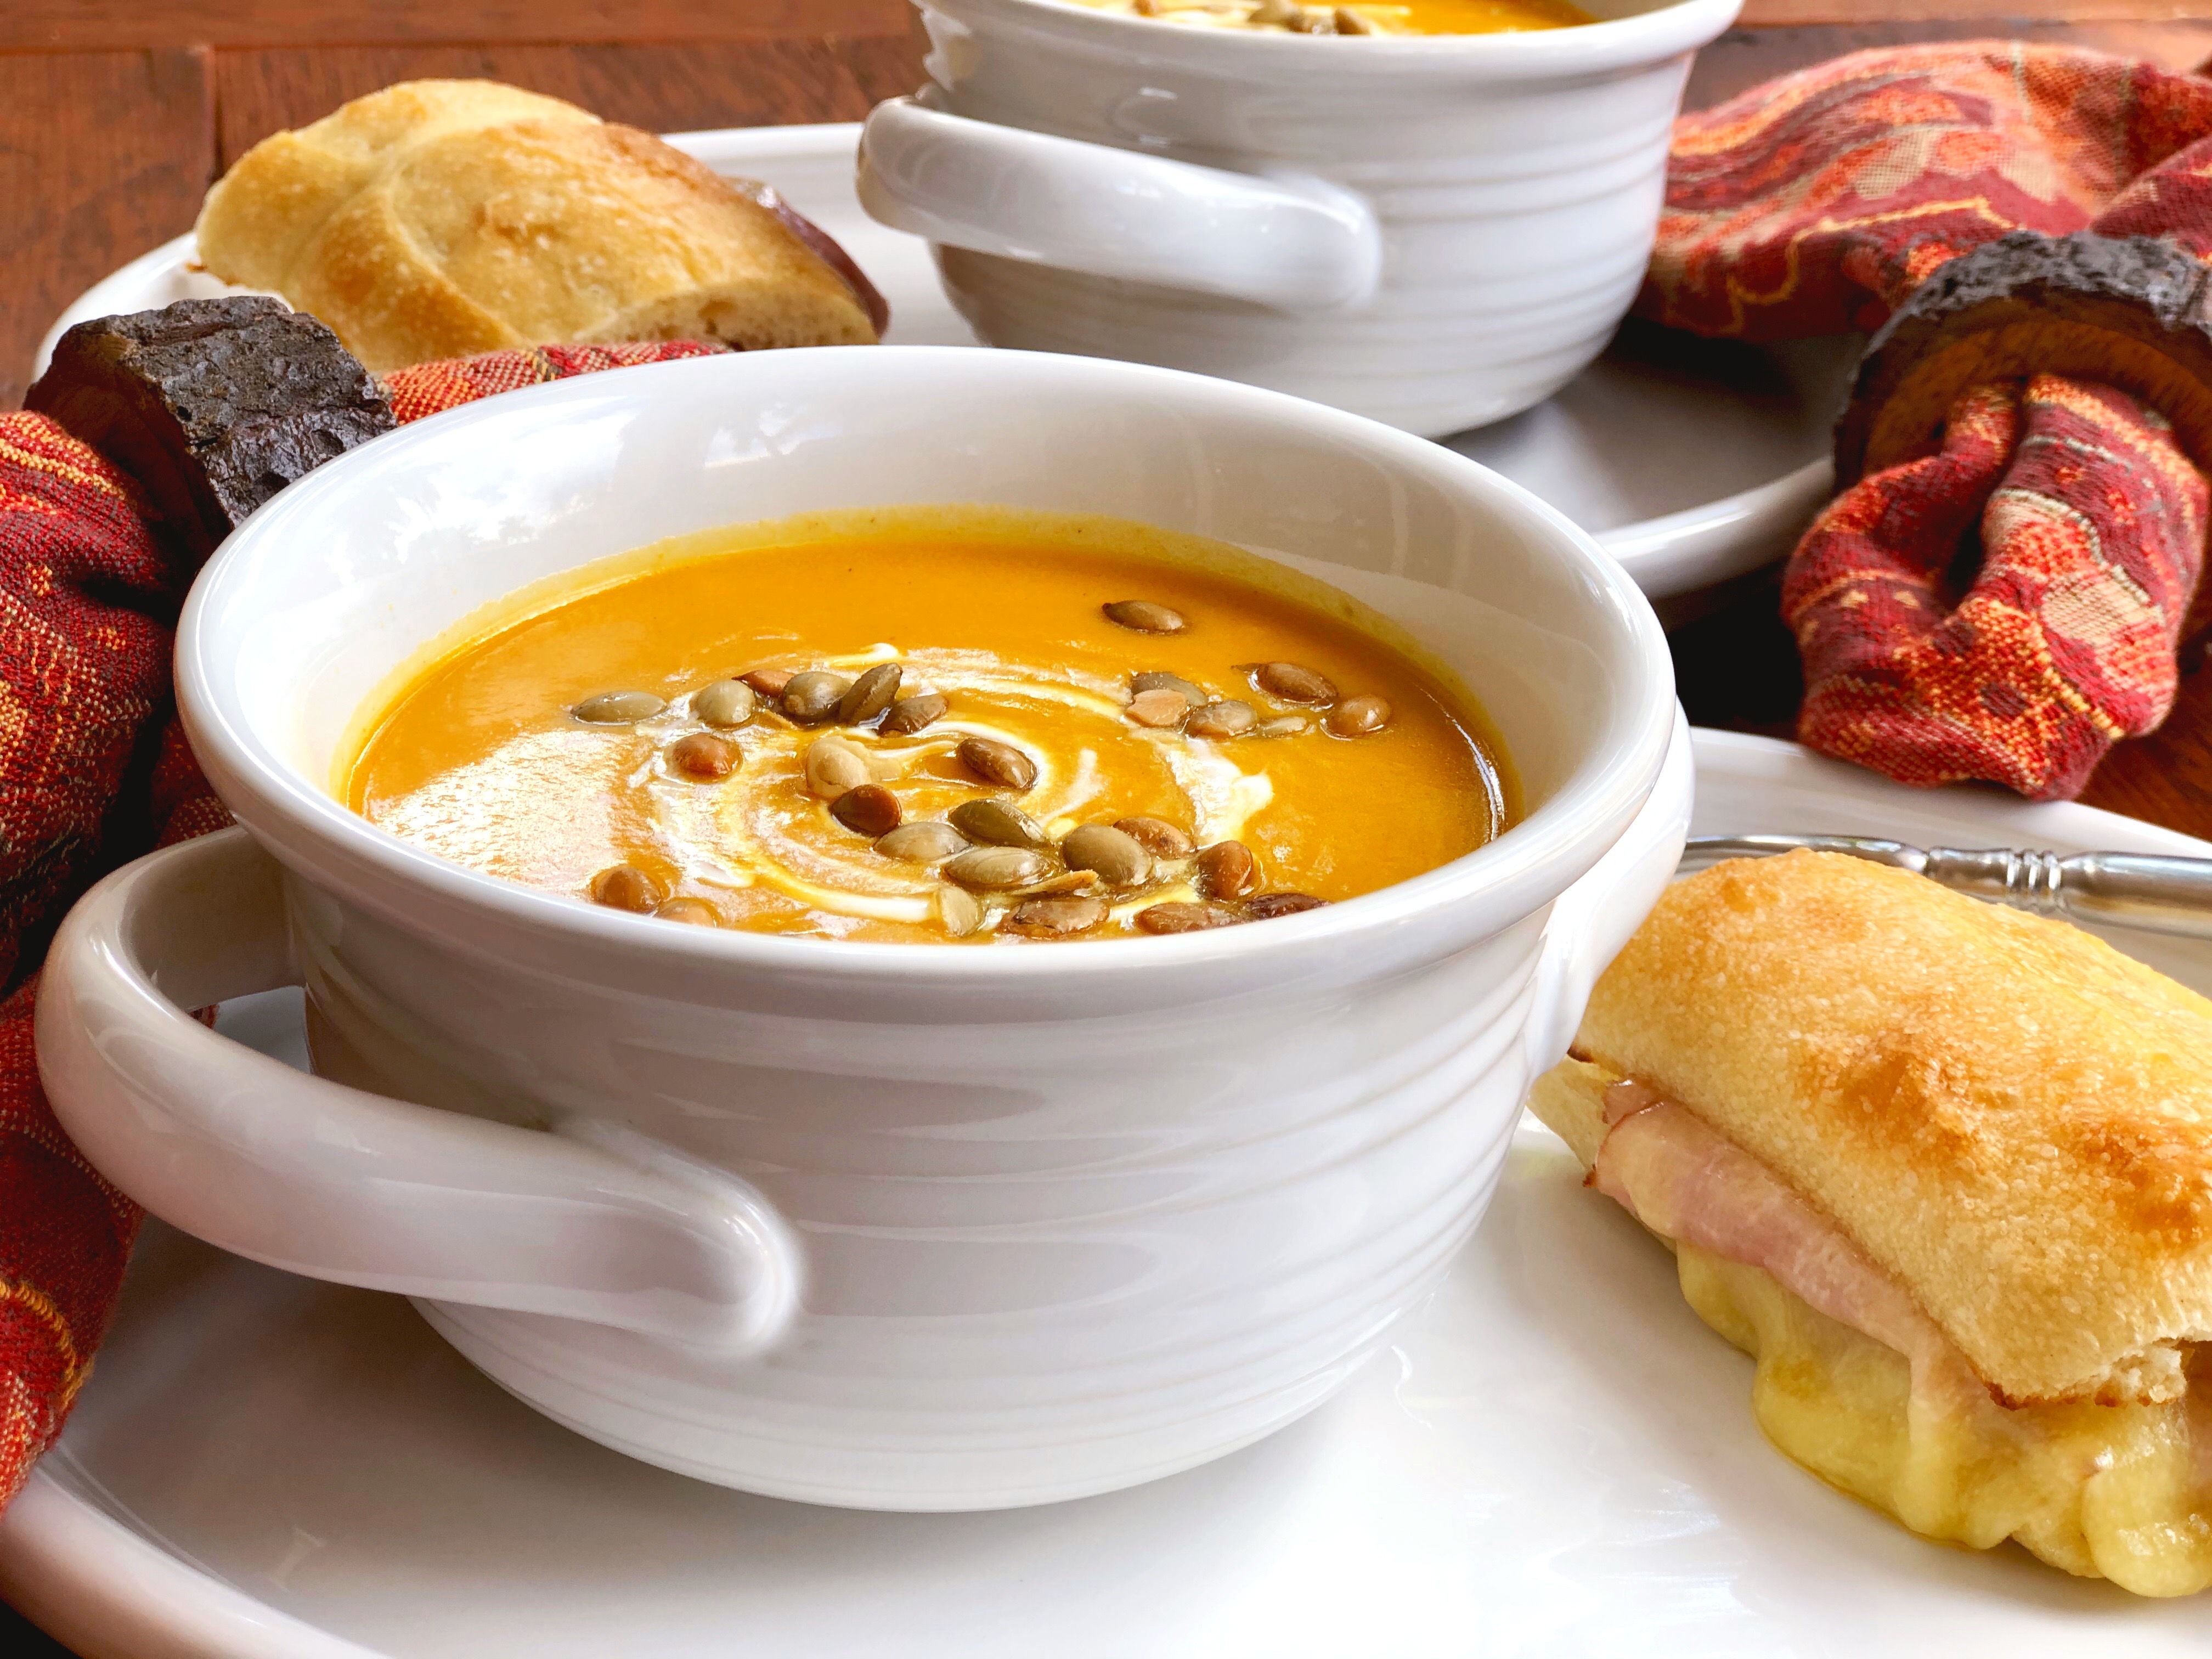 Cozy up on a chilly evening with this homemade Pumpkin Soup with Gruyere Grilled Cheese Ham Sandwich. This simple deli-style meal is the perfect comfort food for lunch or dinner.